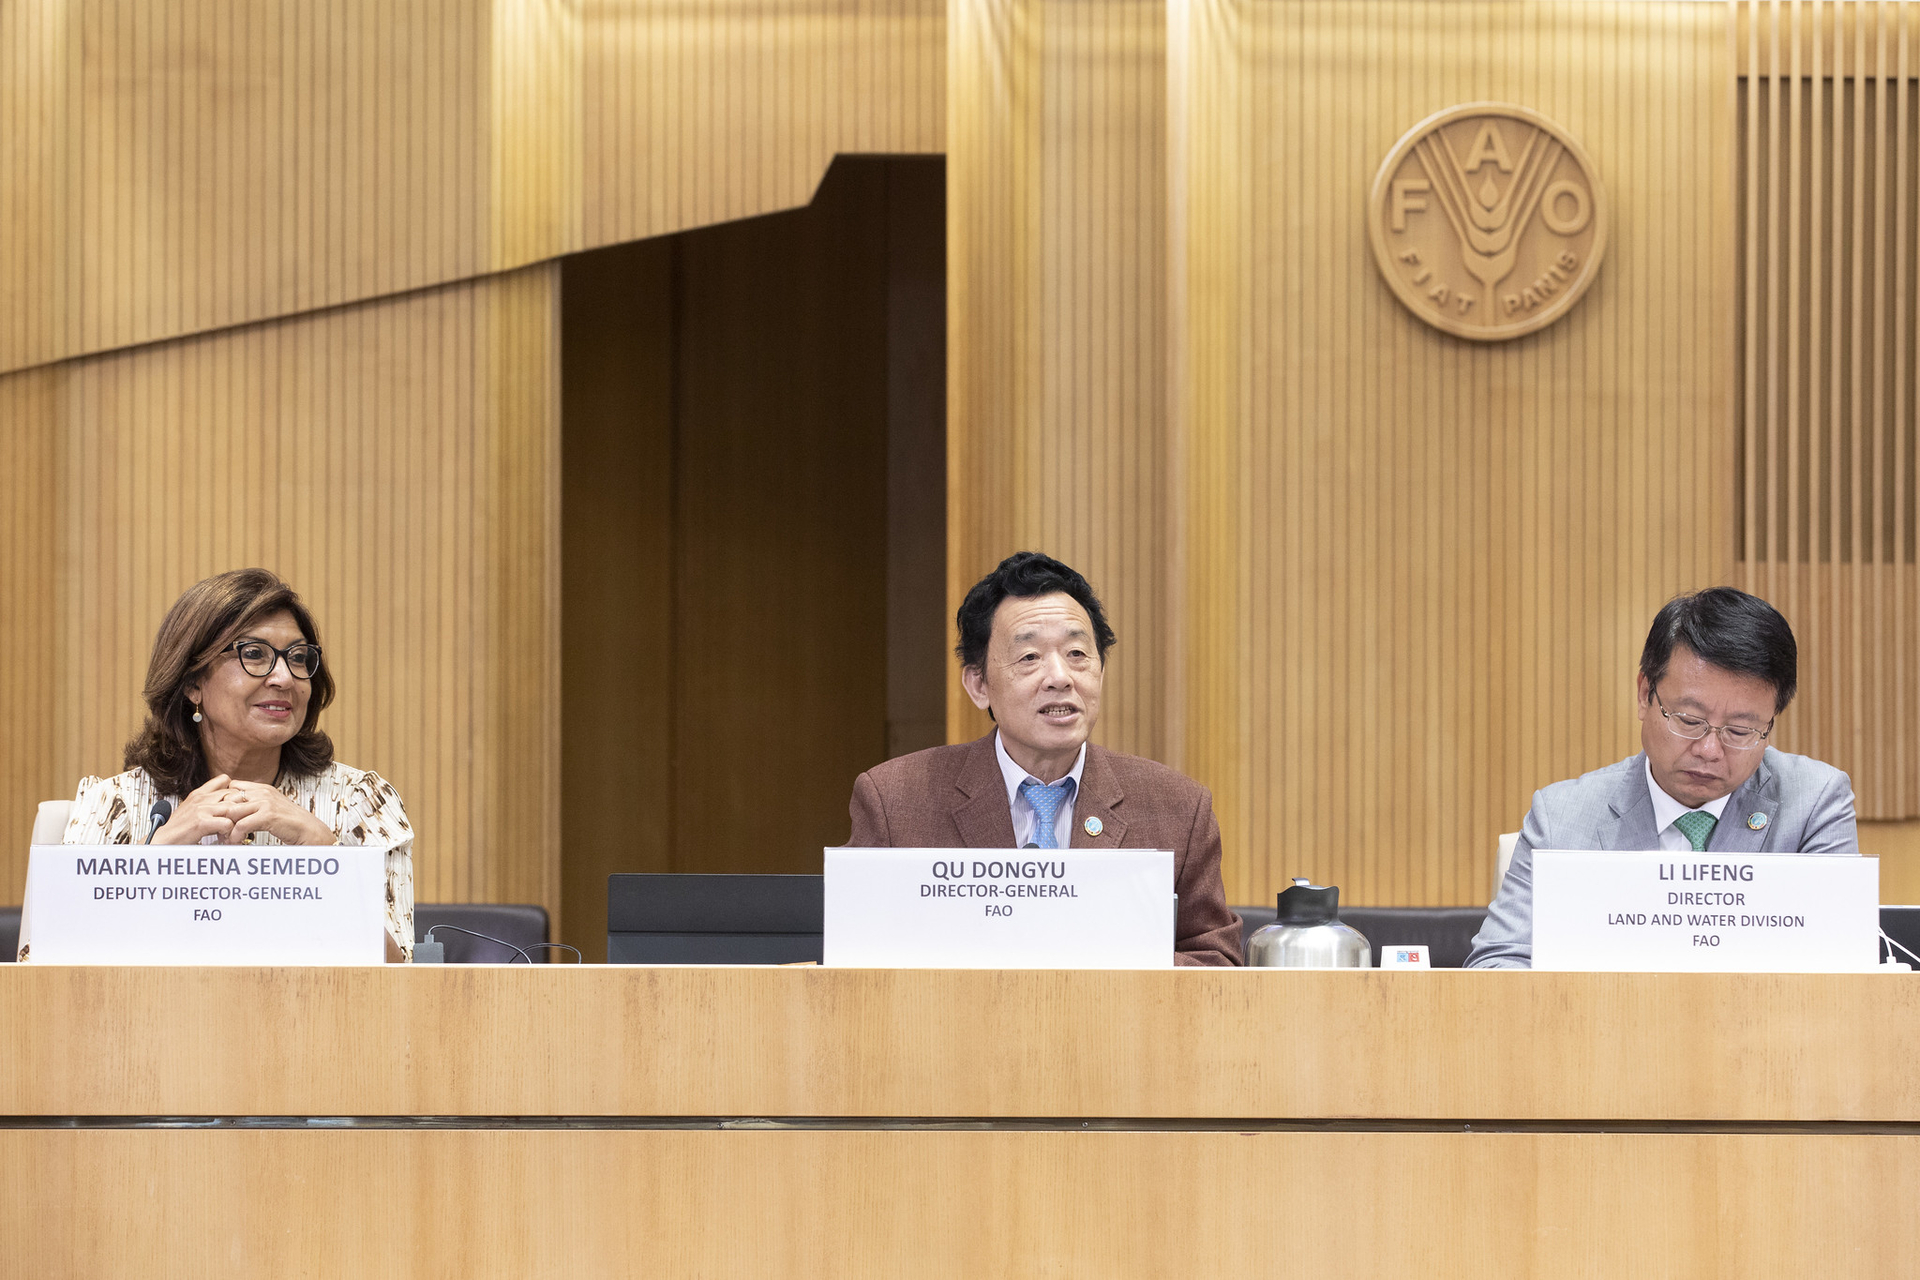 FAO Director-General QU Dongyu, center, Deputy Director-General Maria Helena Semedo, left, and Lifeng Li, Director of Land and Water Division, right.